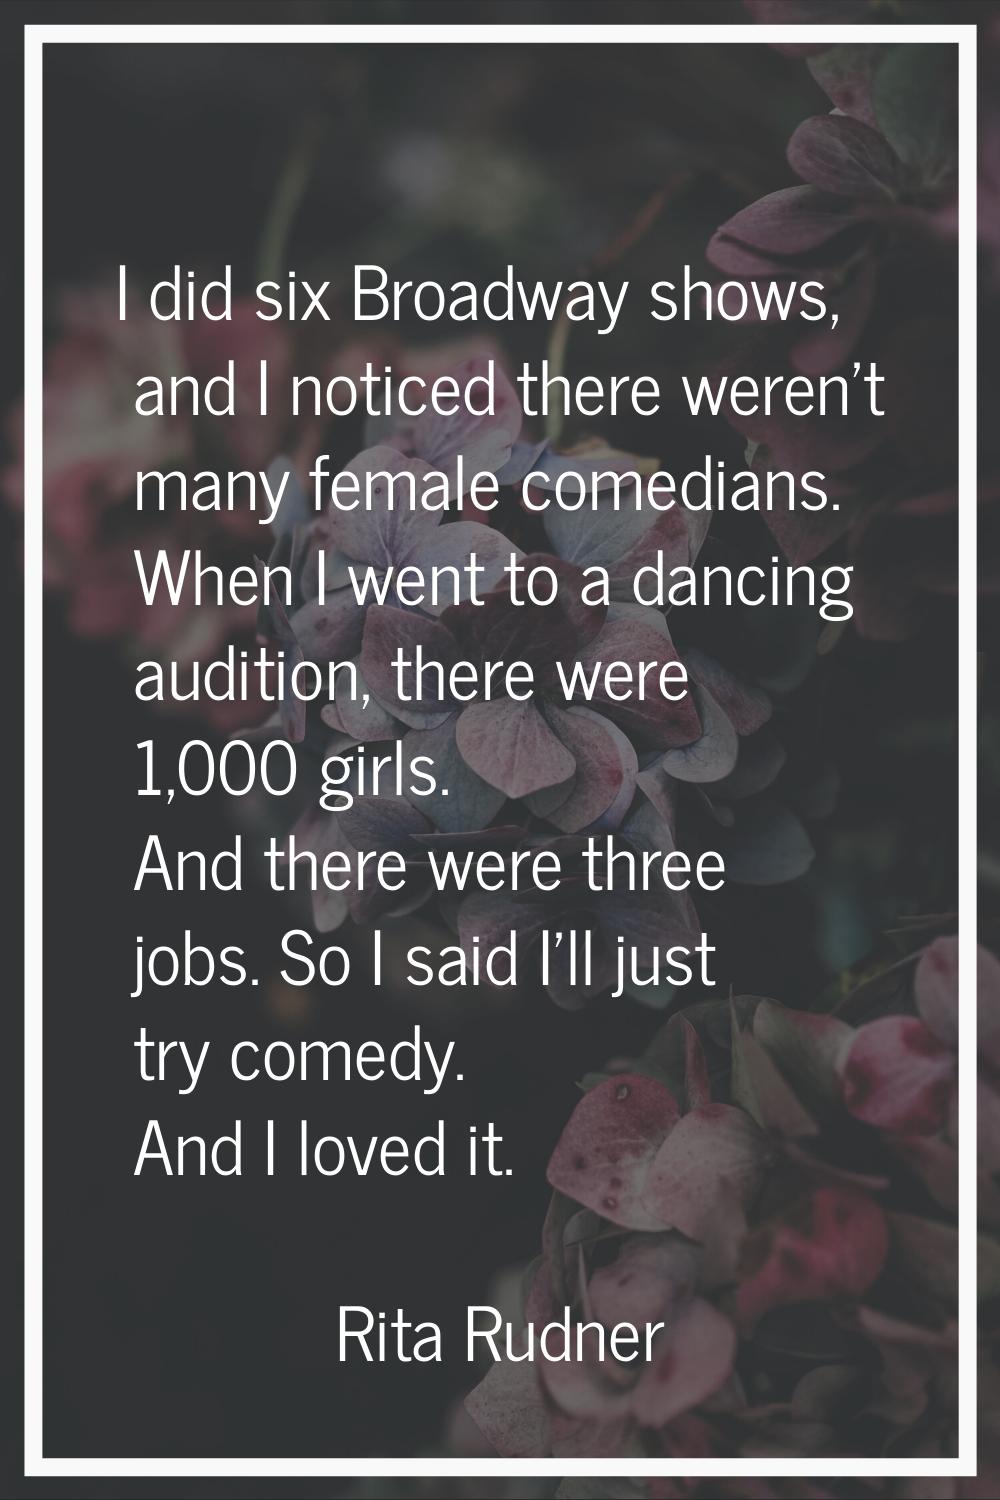 I did six Broadway shows, and I noticed there weren't many female comedians. When I went to a danci